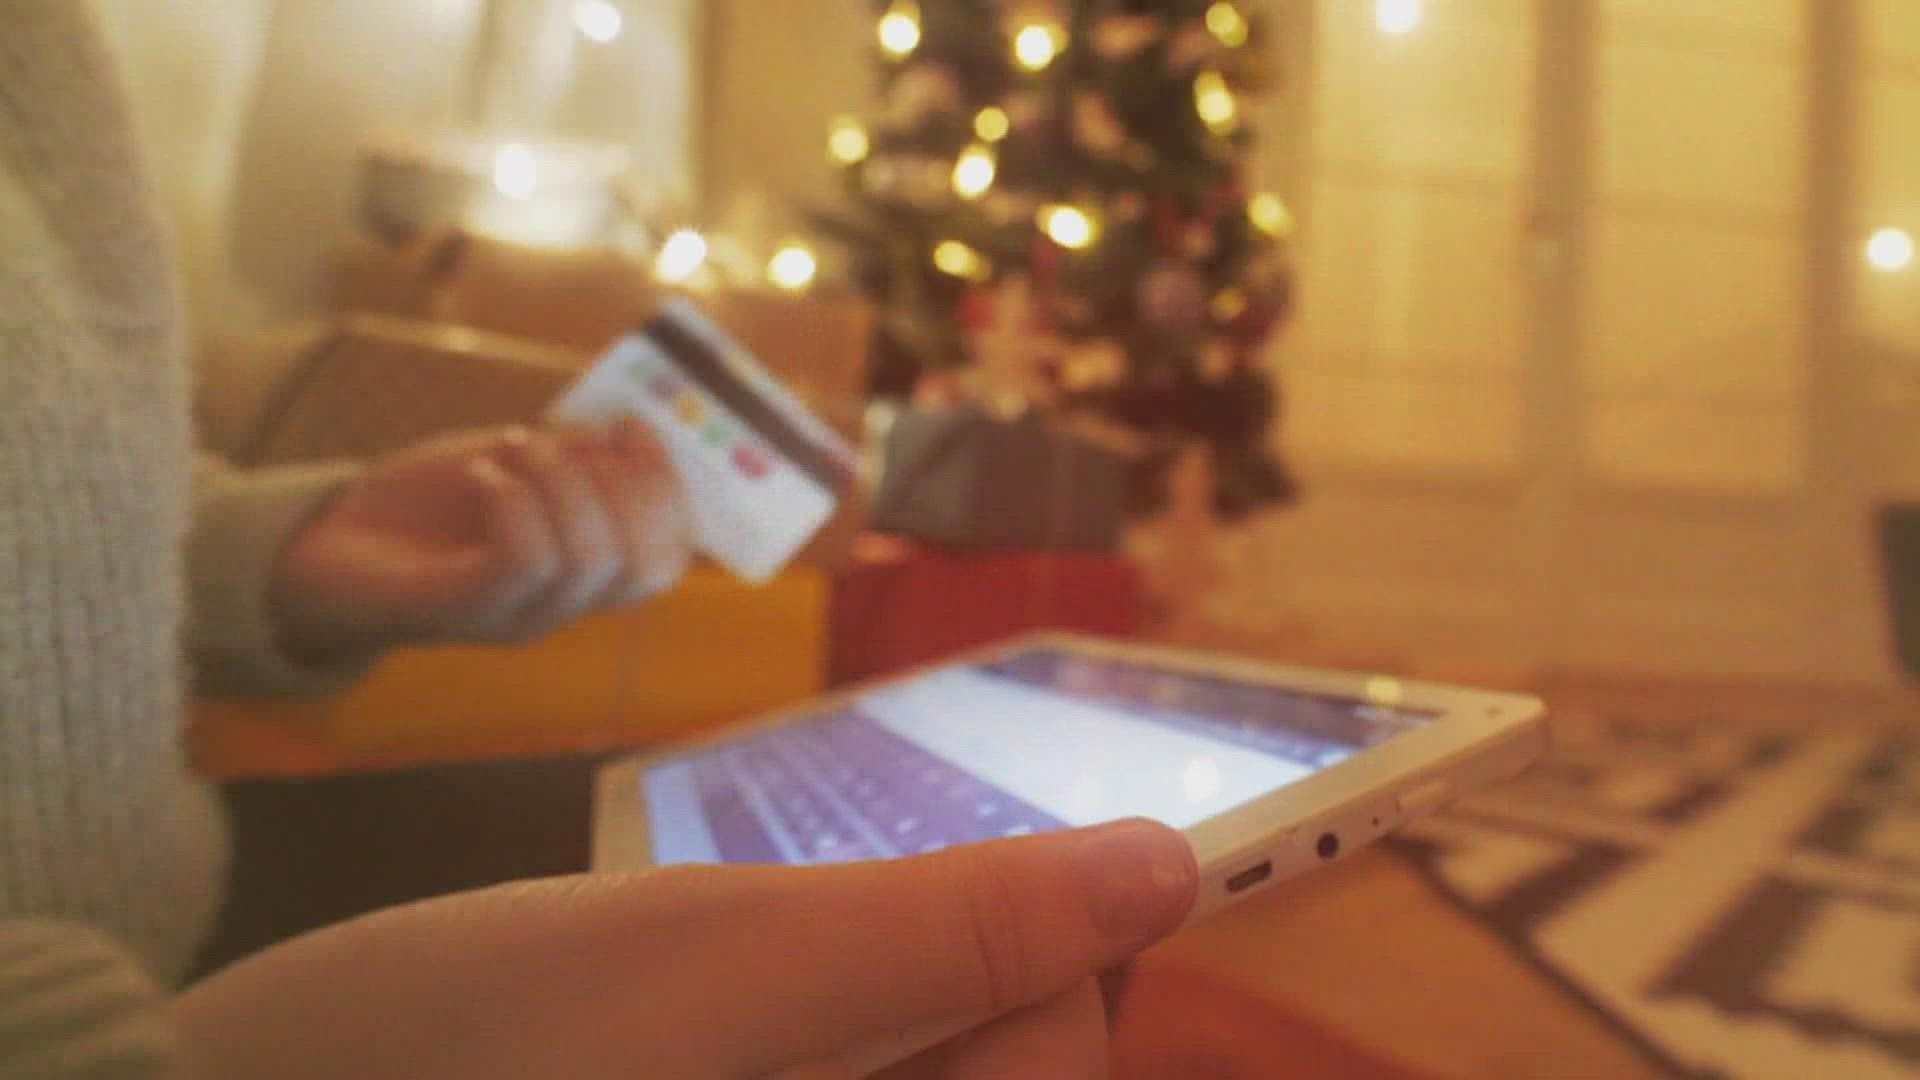 The holiday shopping season is almost here, and it's a good time for a reminder to watch out for scammers lurking while you shop online.